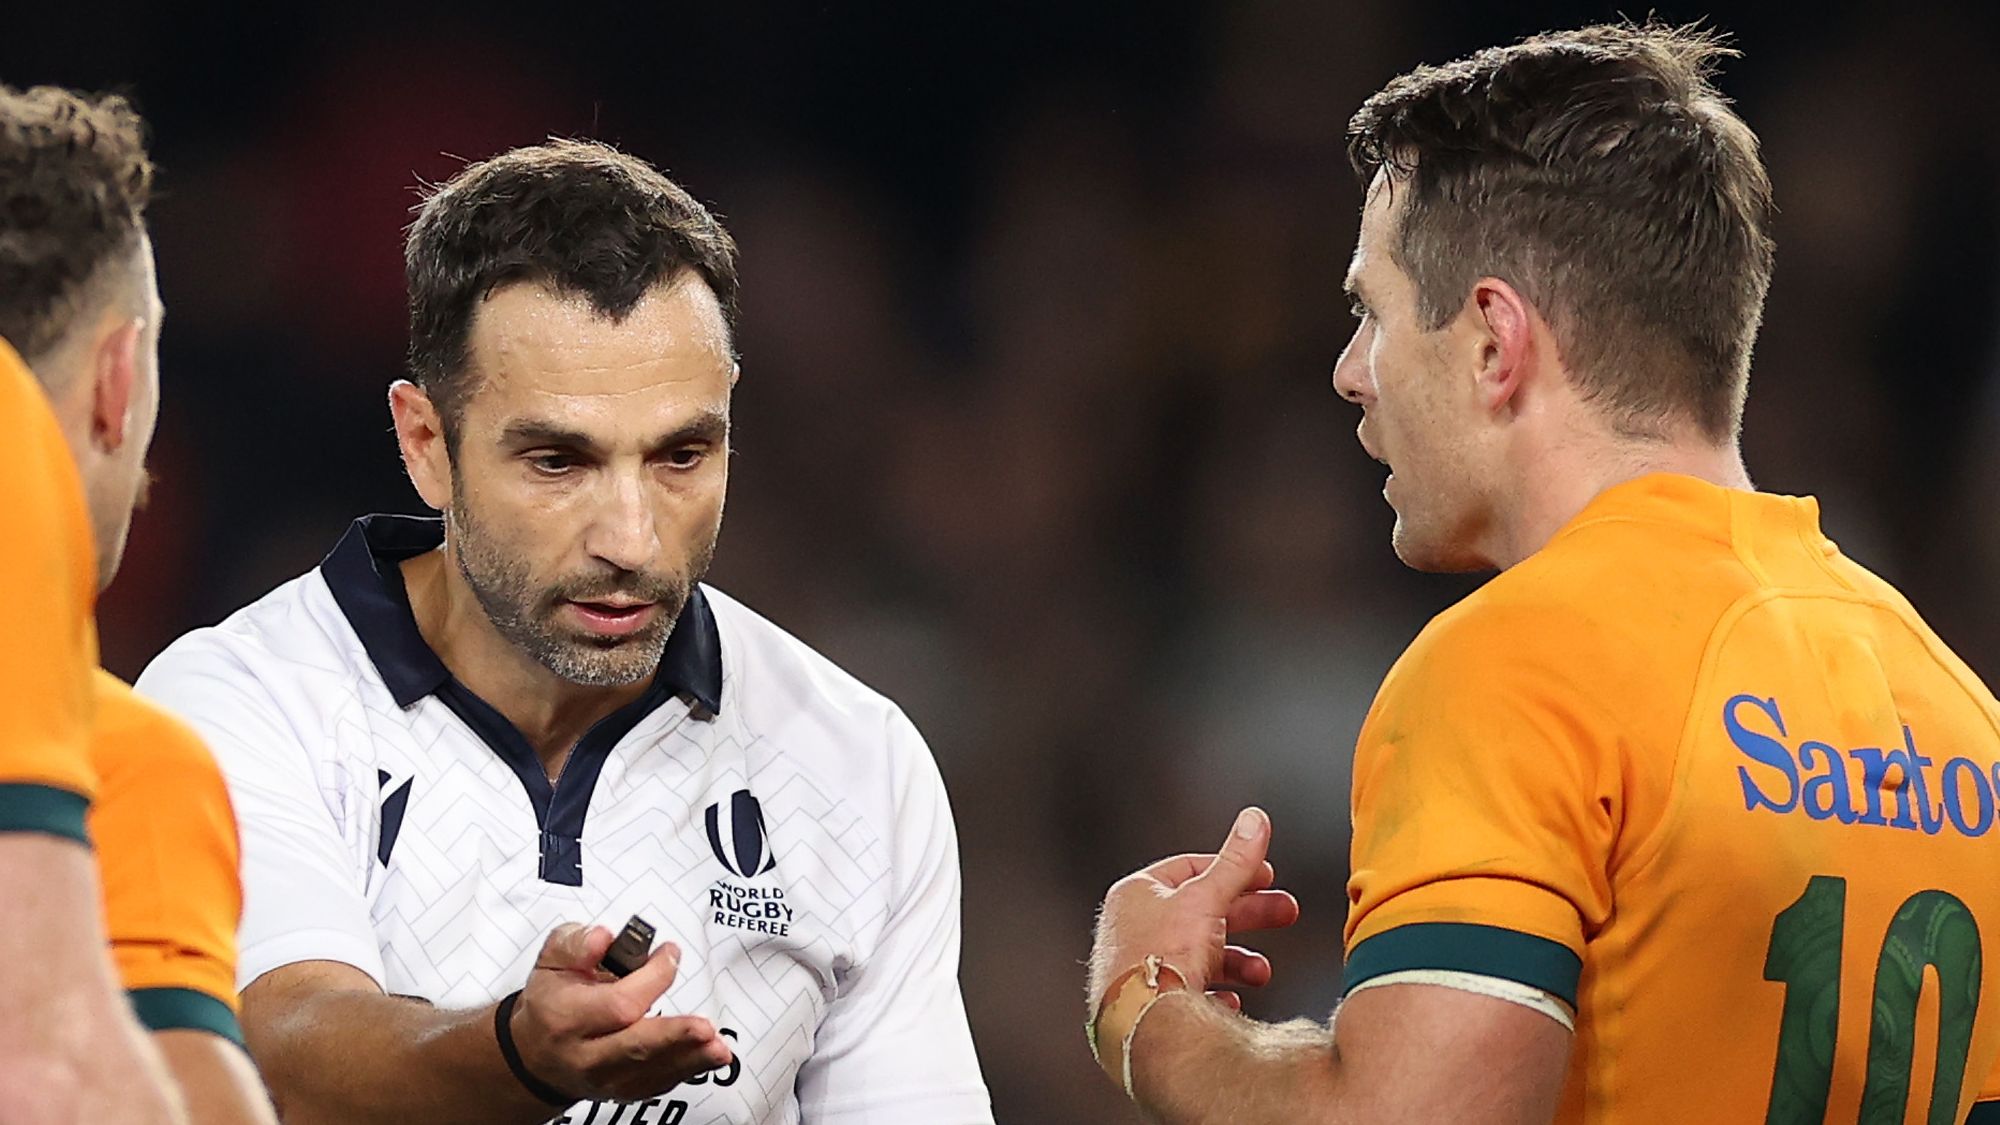 Referee Mathieu Raynal speaks to the Wallabies.